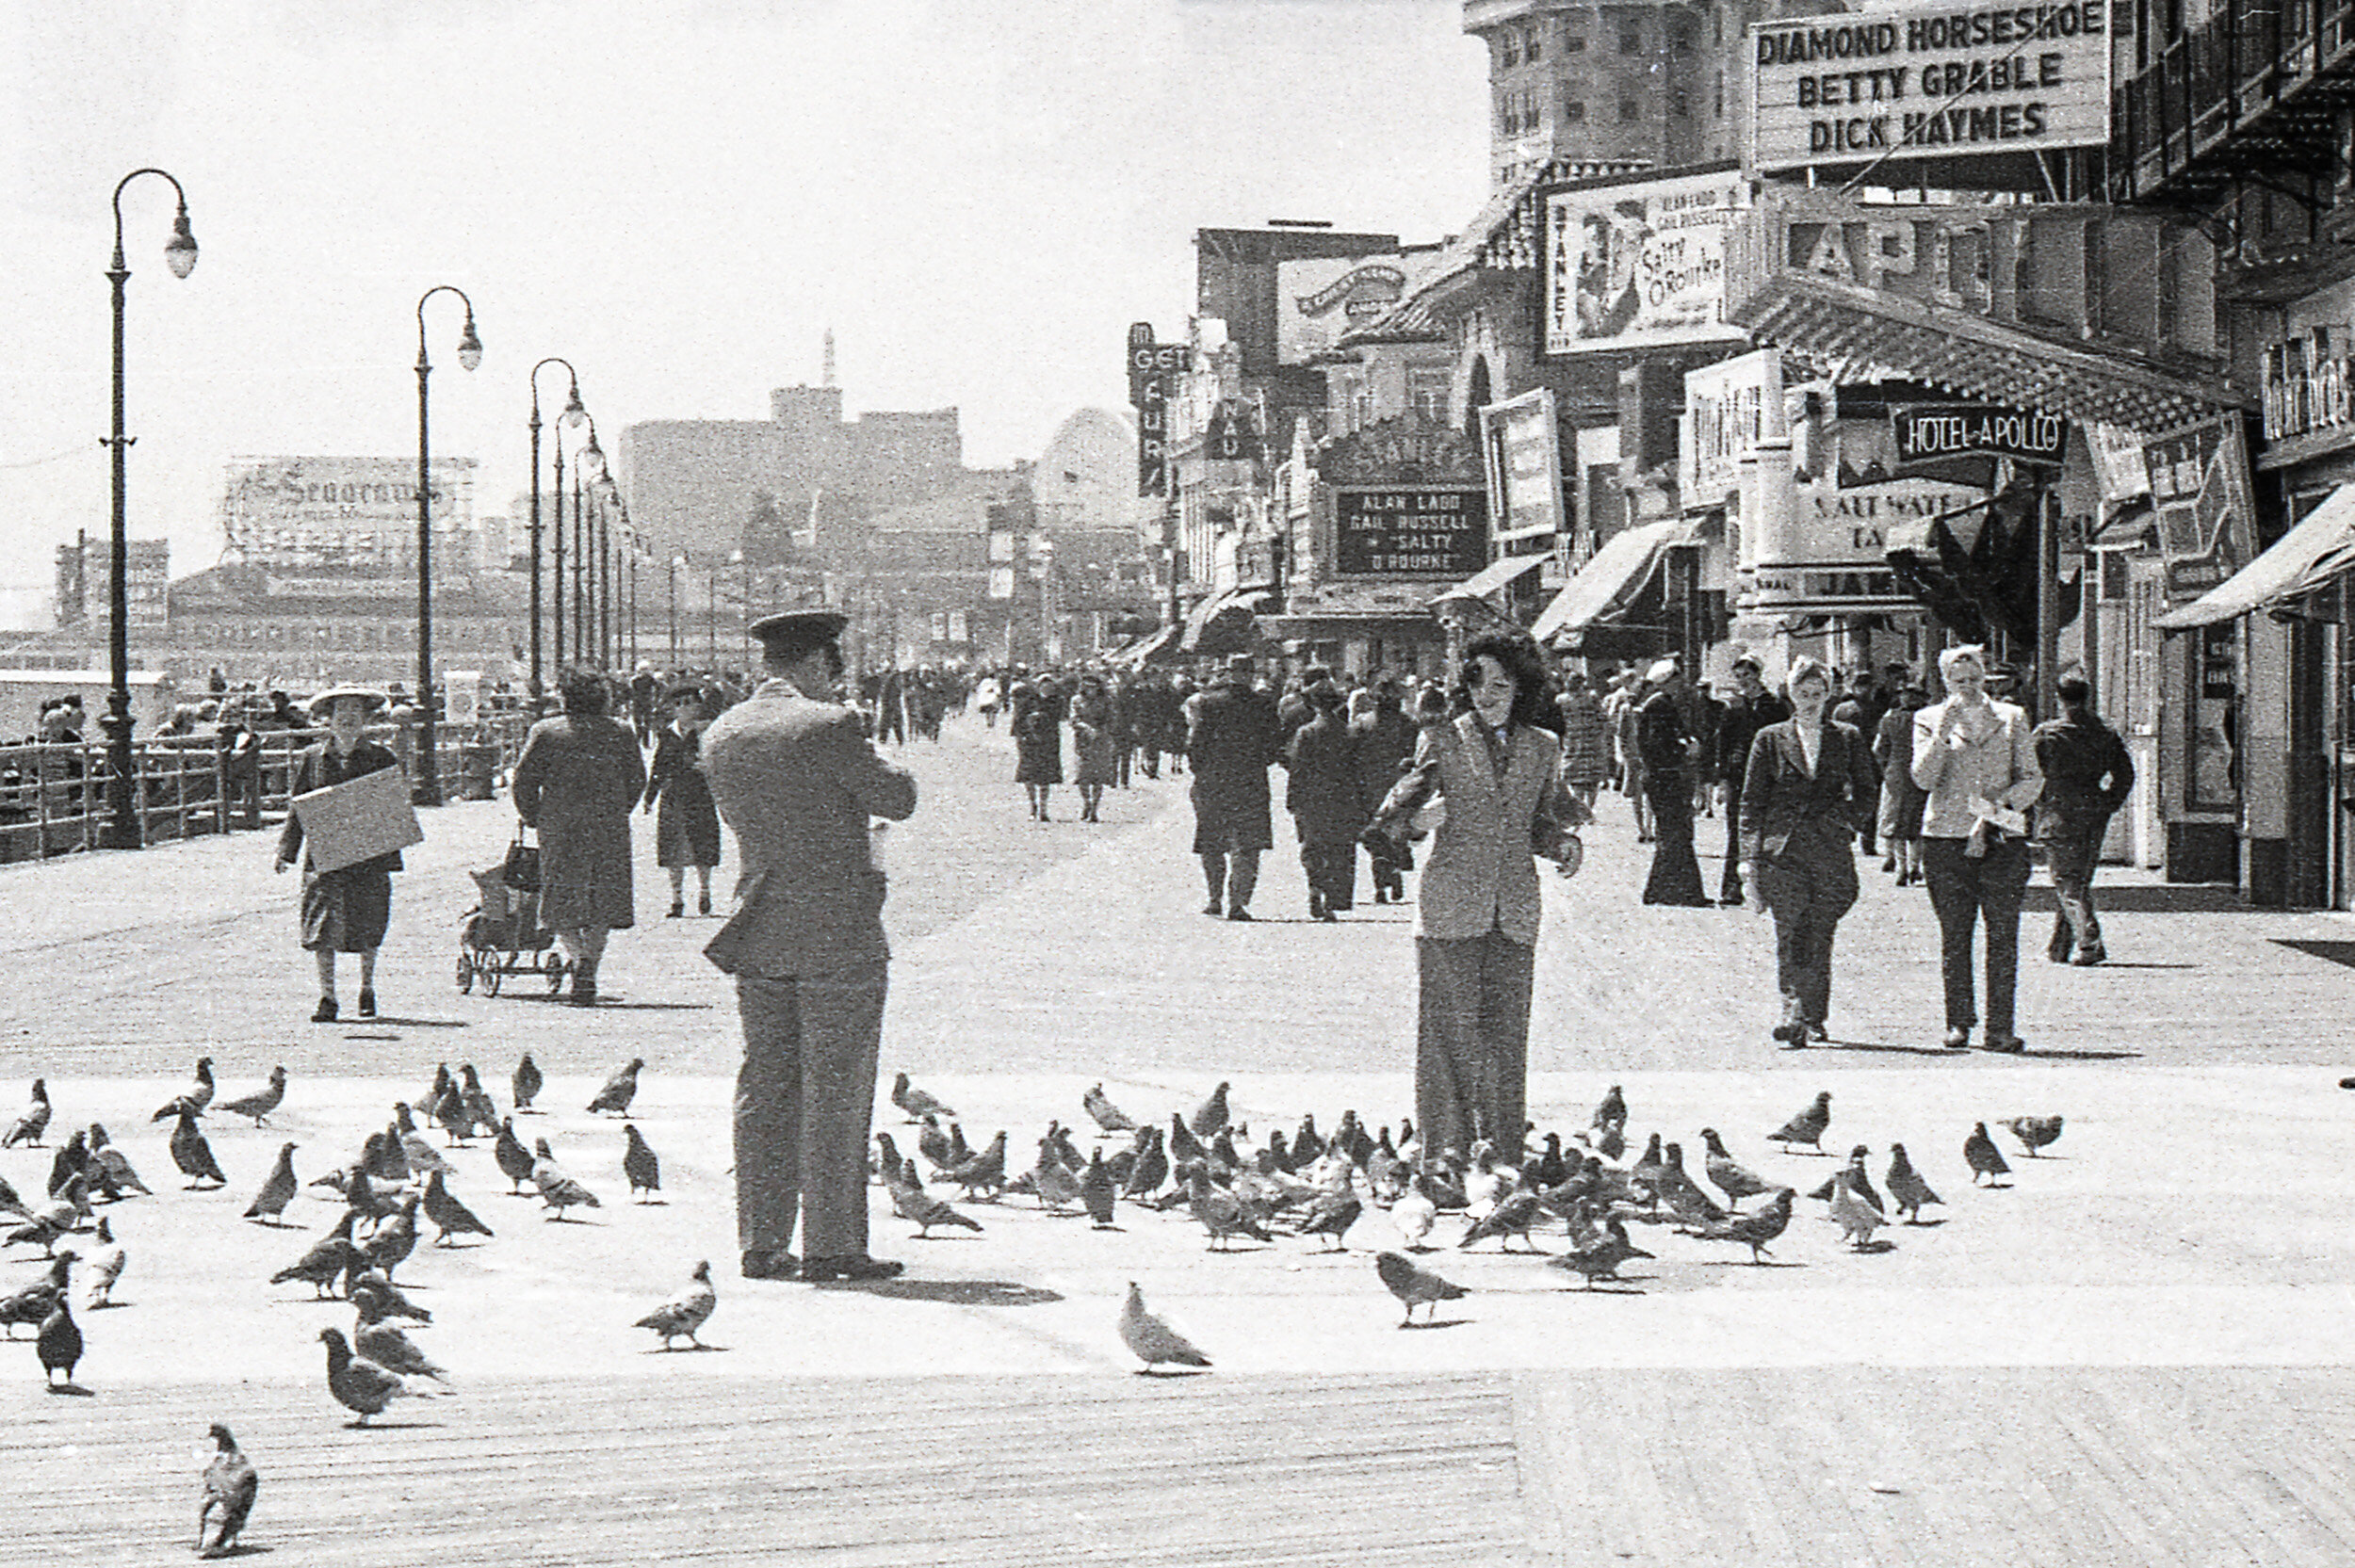 A soldier and his girlfriend in Atlantic City during WWII